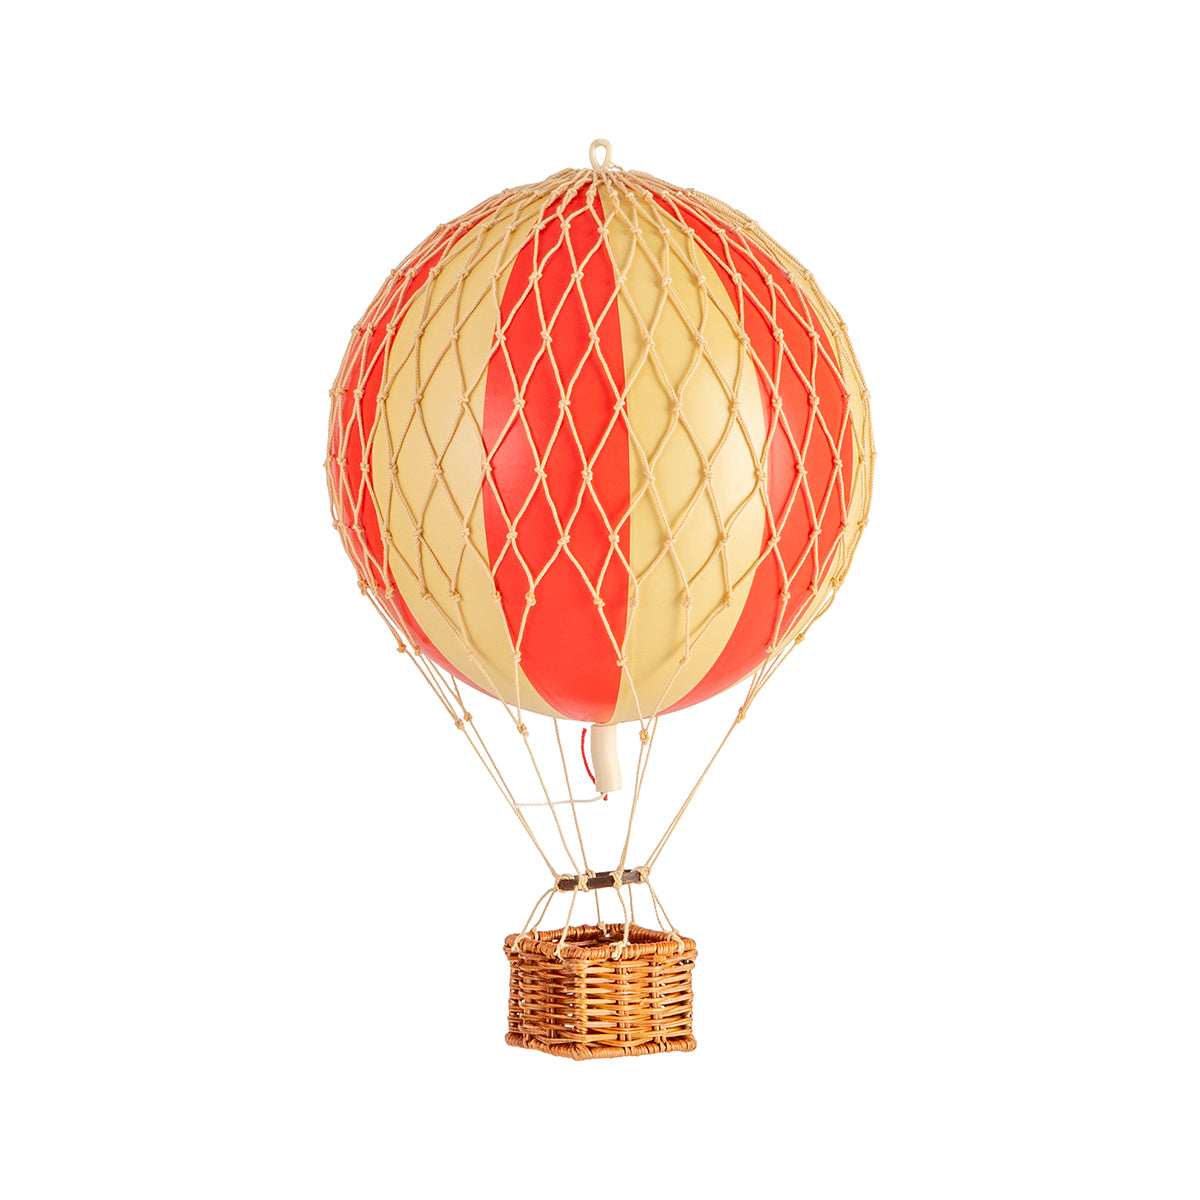 A Wonderen Small Hot Air Balloon - Travels Light with a wicker basket against a white background.